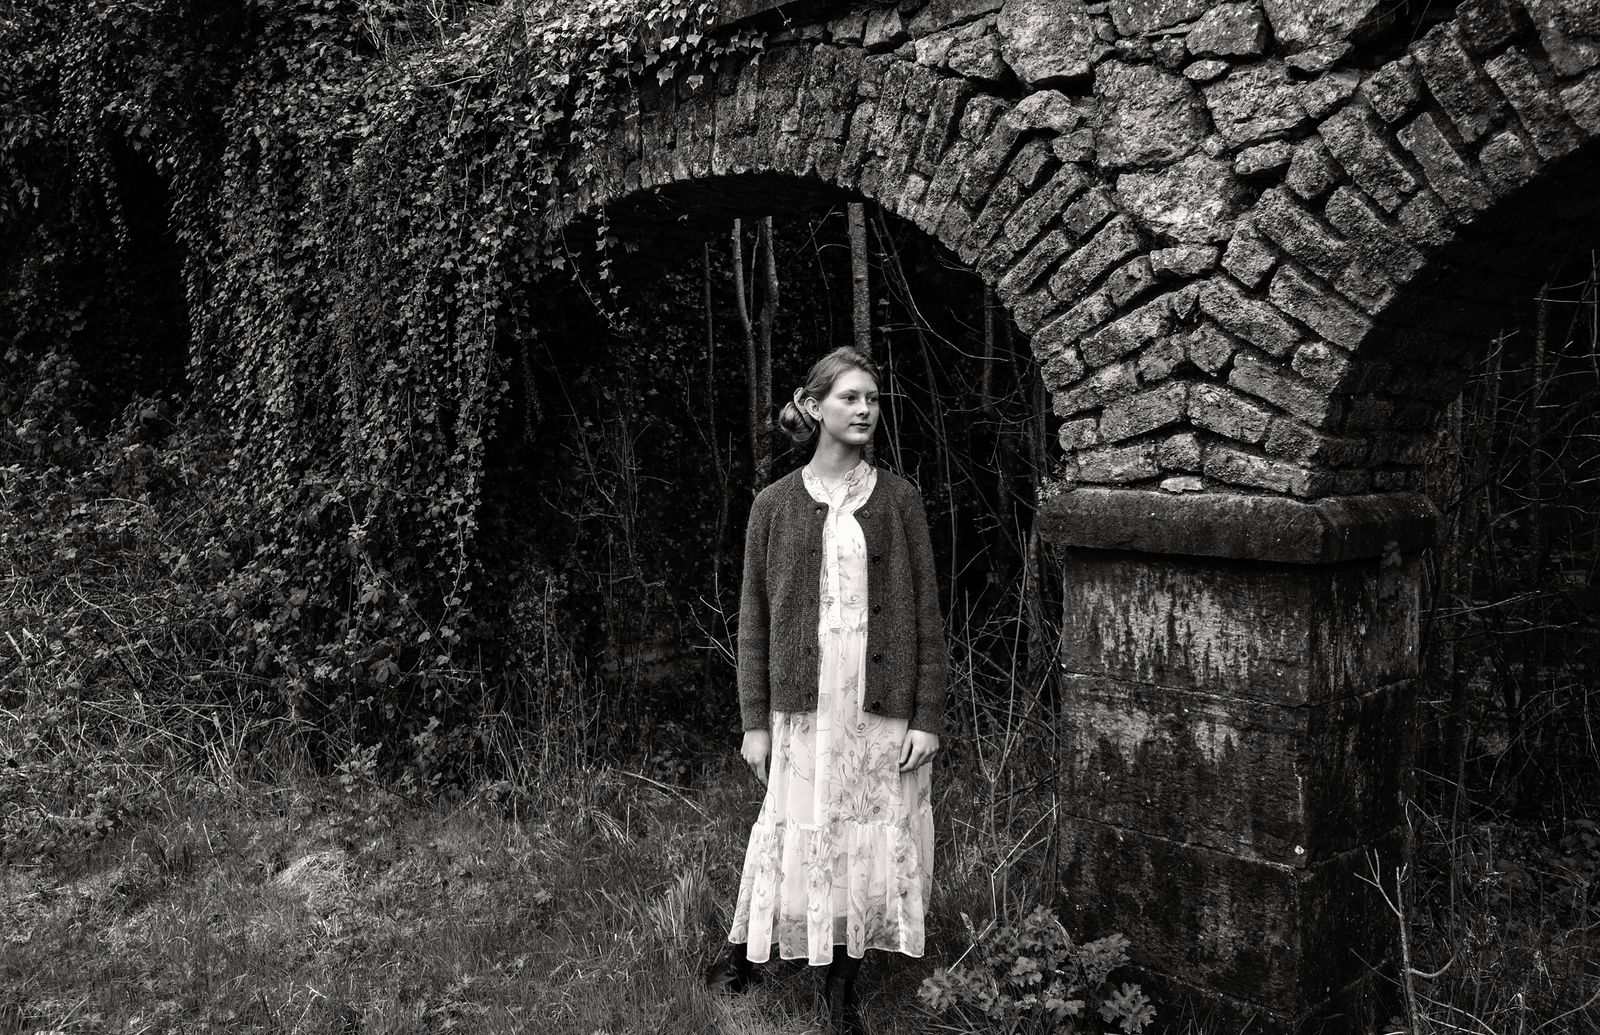 © Sussi Charlotte Alminde - Image from the The scent of Ireland photography project